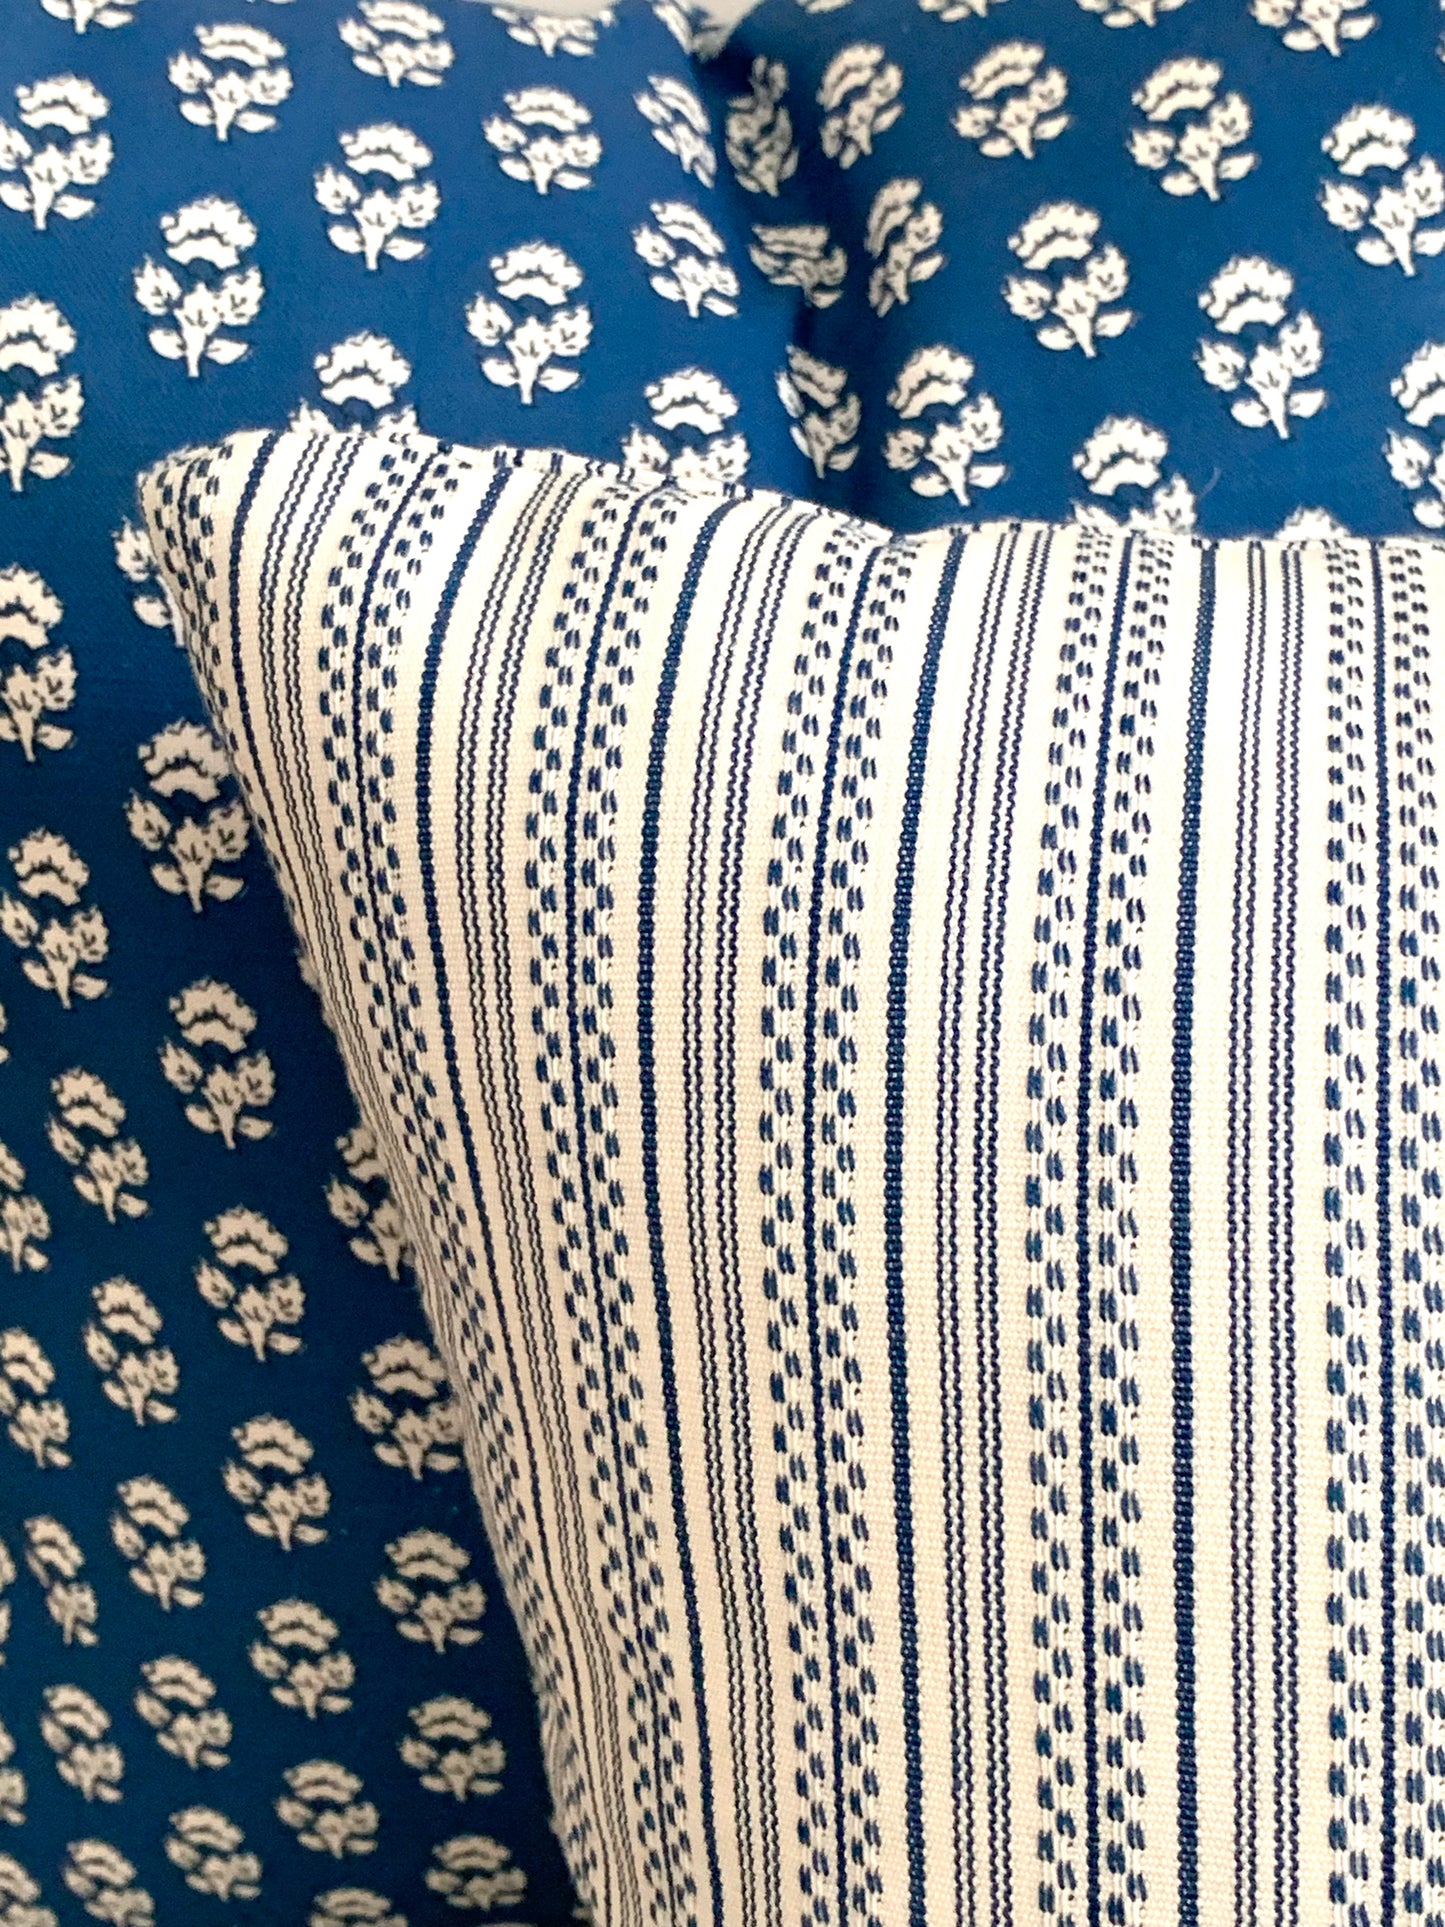 Striped blue and white decorative pillow against a dark blue floral pillow